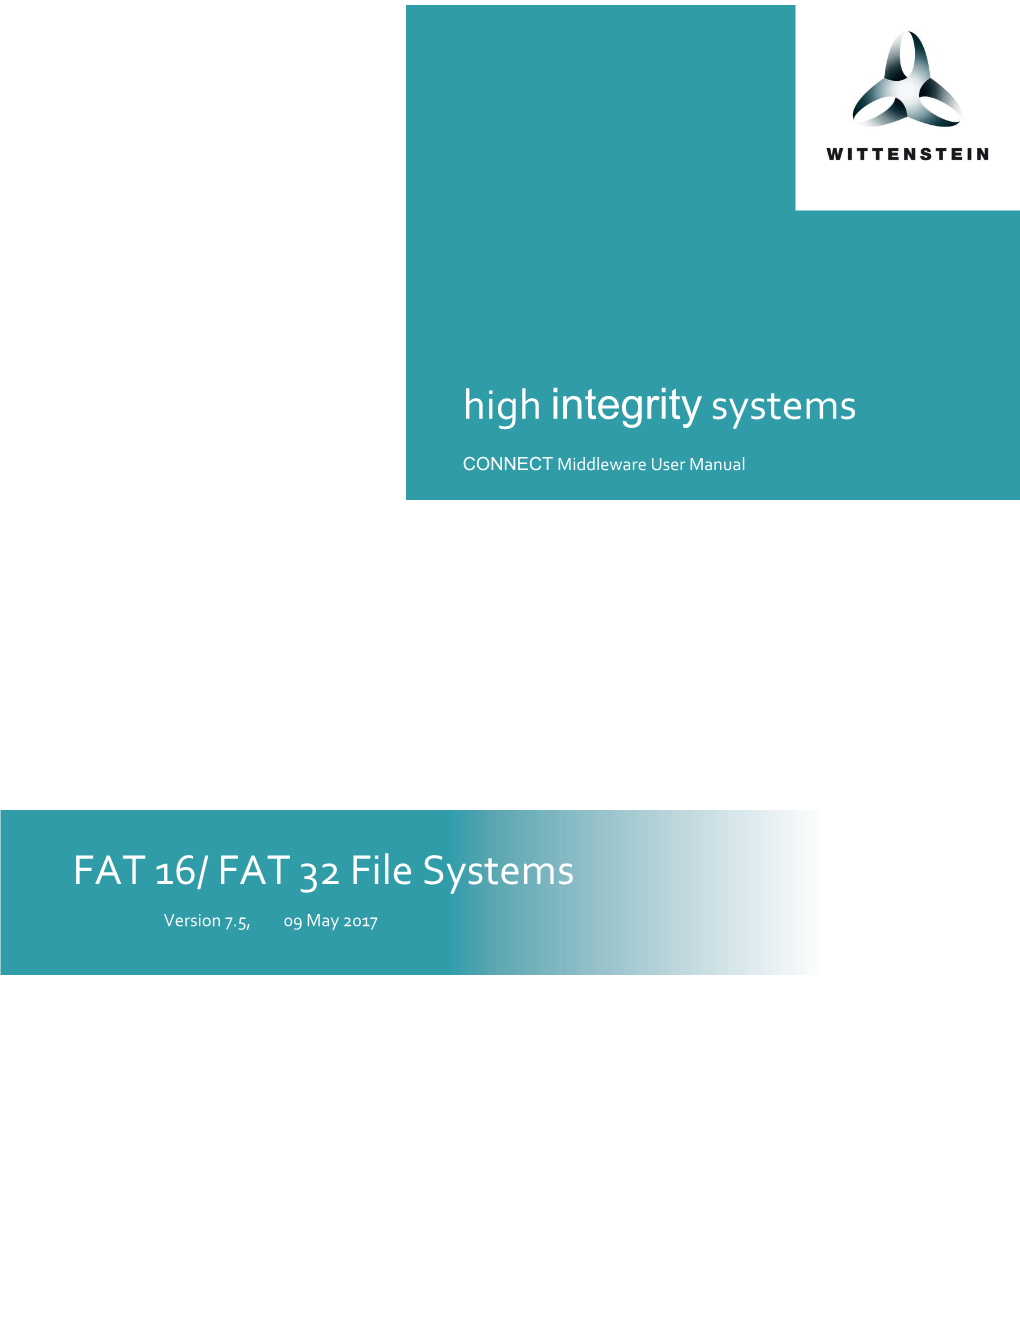 High Integrity Systems FAT 16/ FAT 32 File Systems